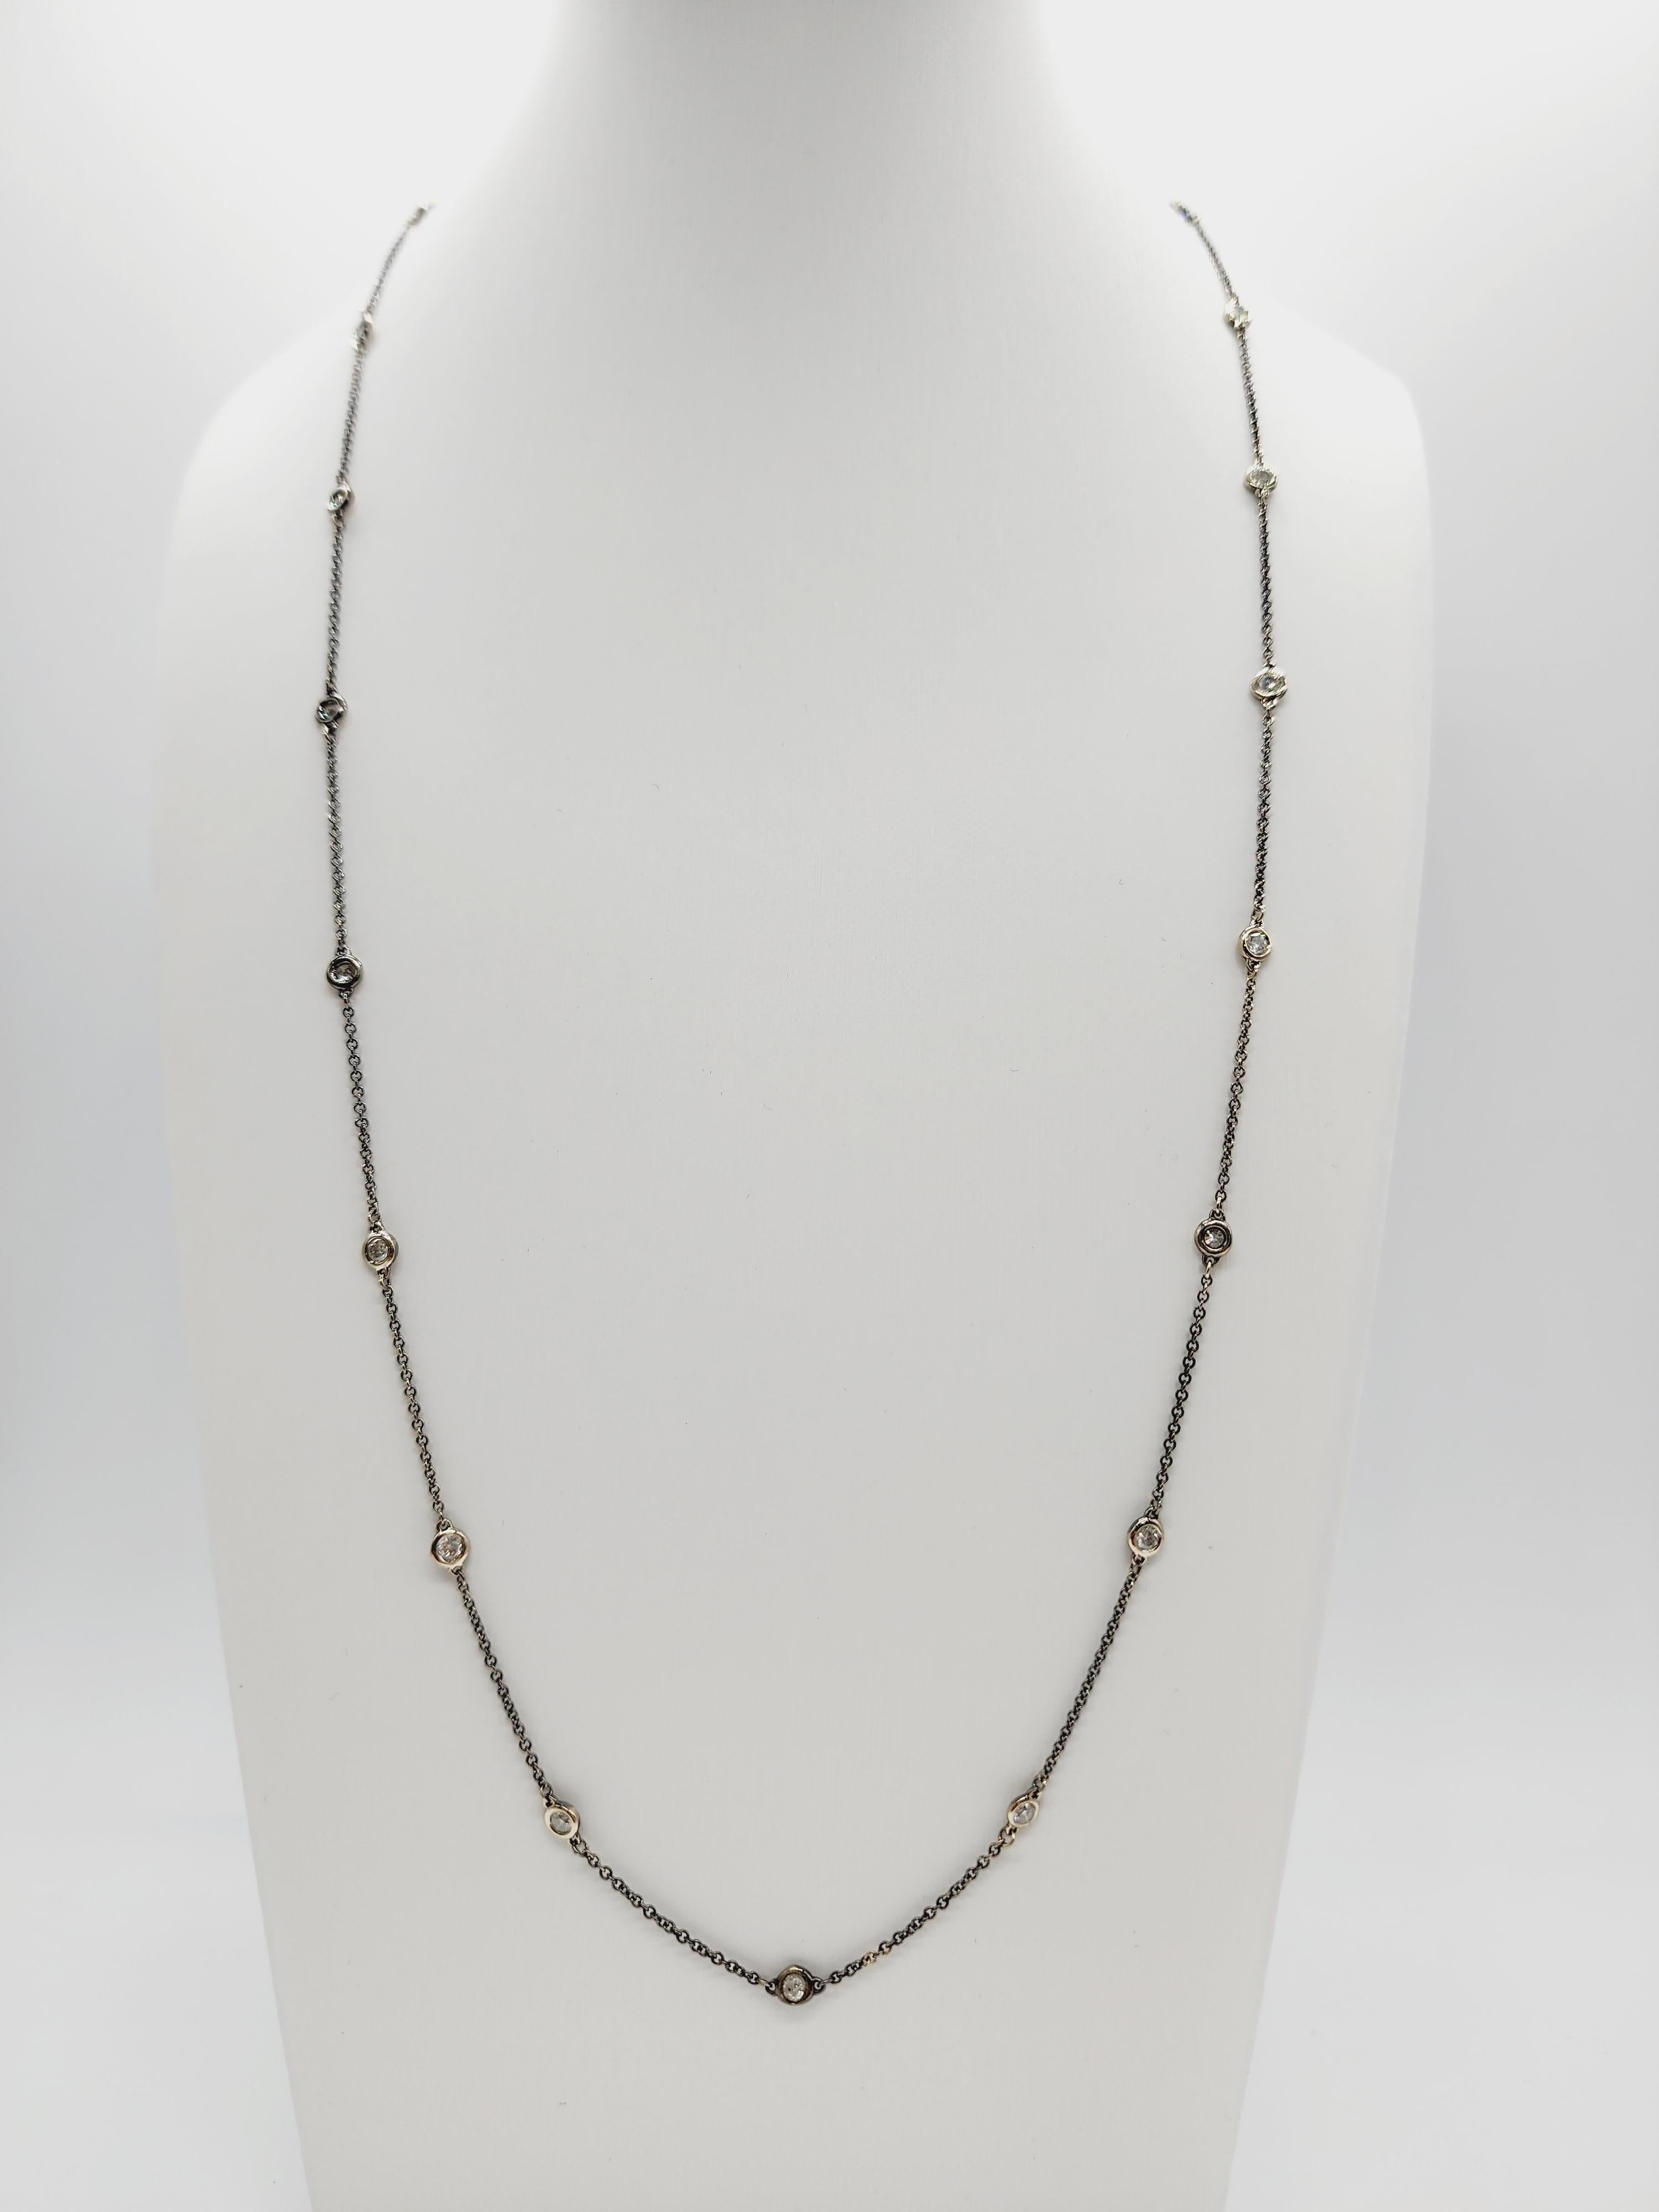 19 Stations Diamond by the yard necklace set in Italian made 14K white gold. 
The total weight is 1.05 carats. Beautiful shiny stones. 
The total length is 24 inch. Lobster Lock